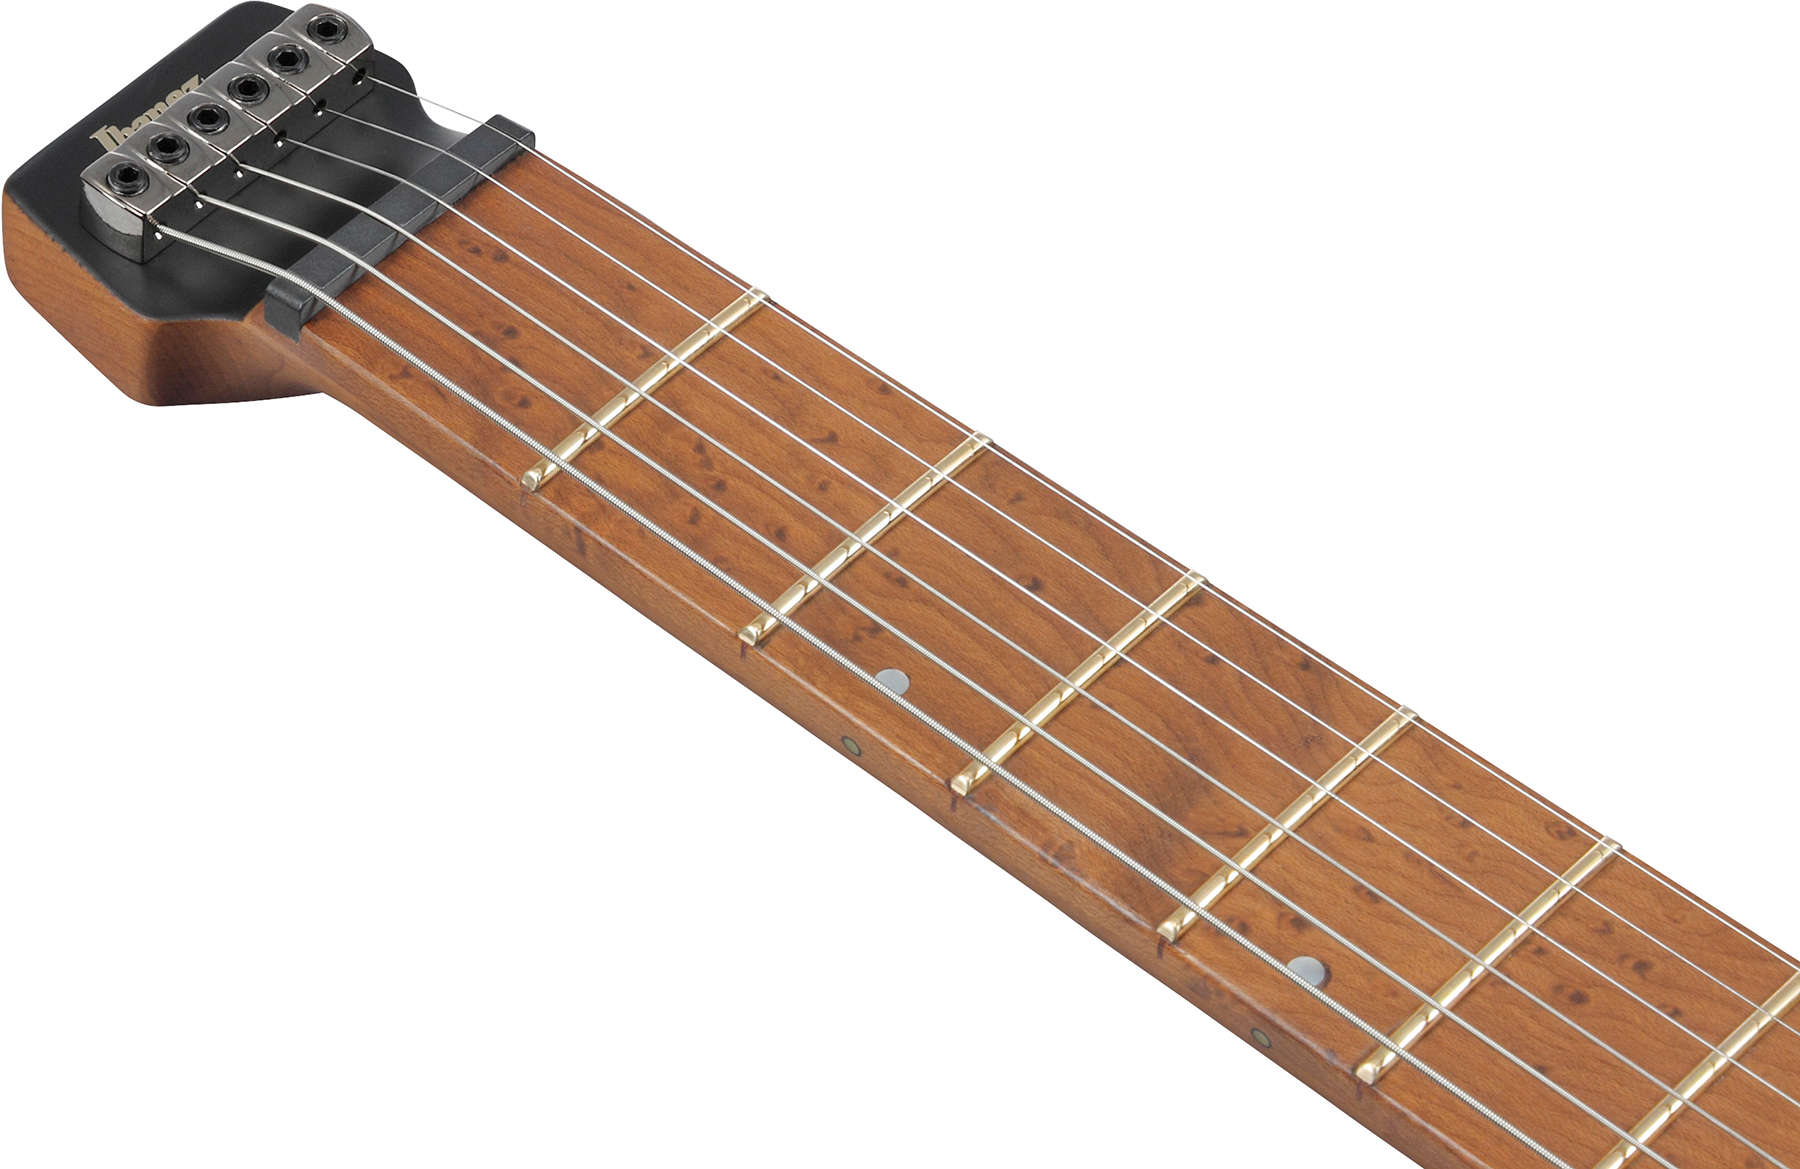 Ibanez Q52pb Abs Quest 2h Ht Mn - Antique Brown Stained - Guitarra electrica metalica - Variation 4